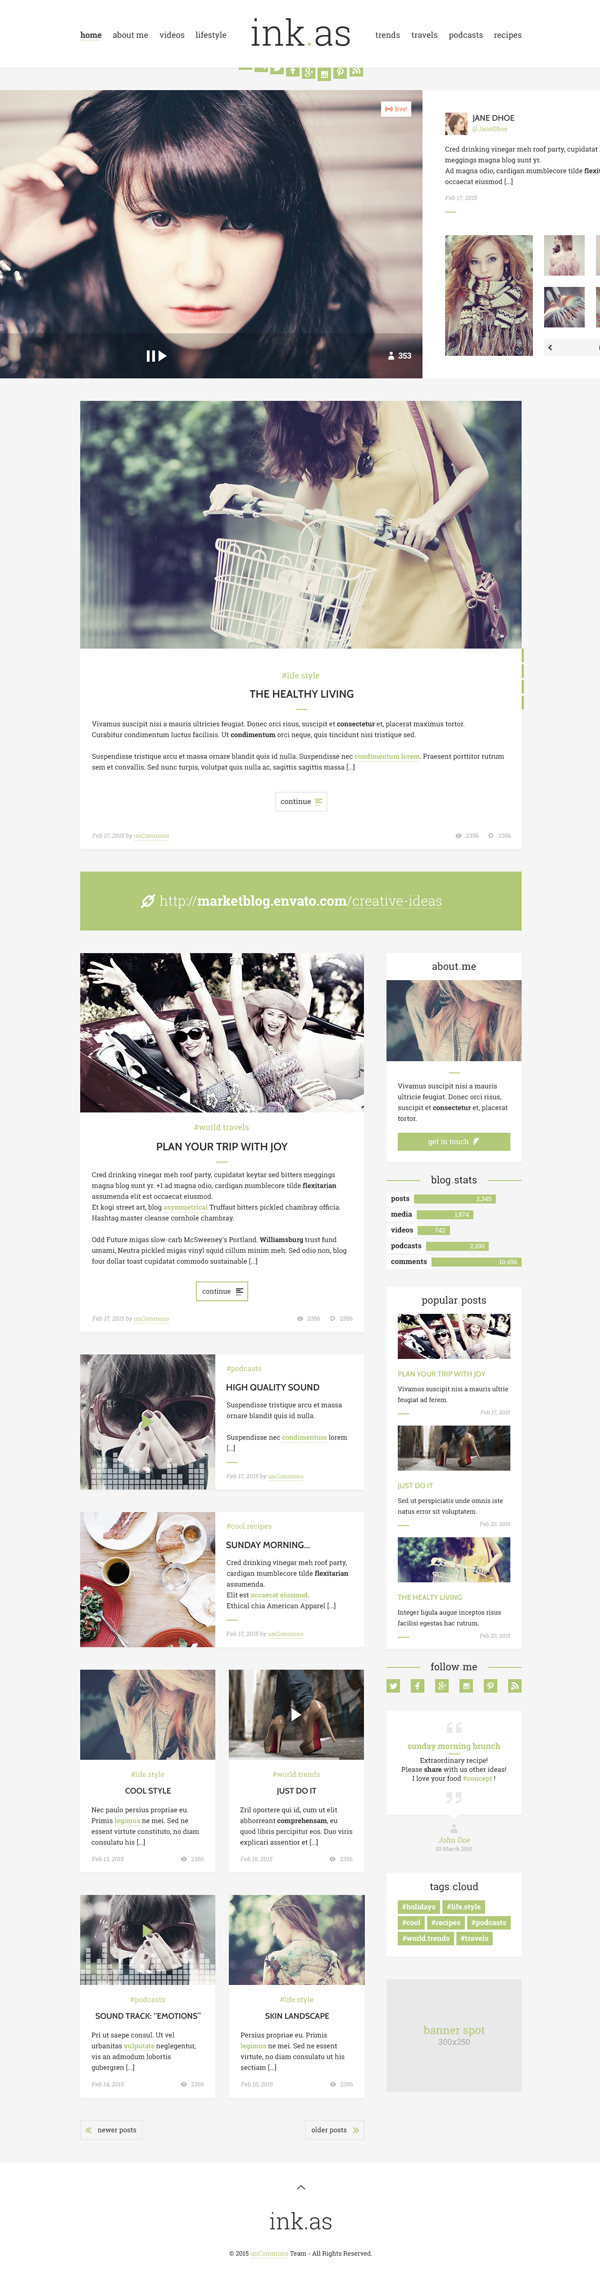 Inkas - The Personal Blog WP Theme